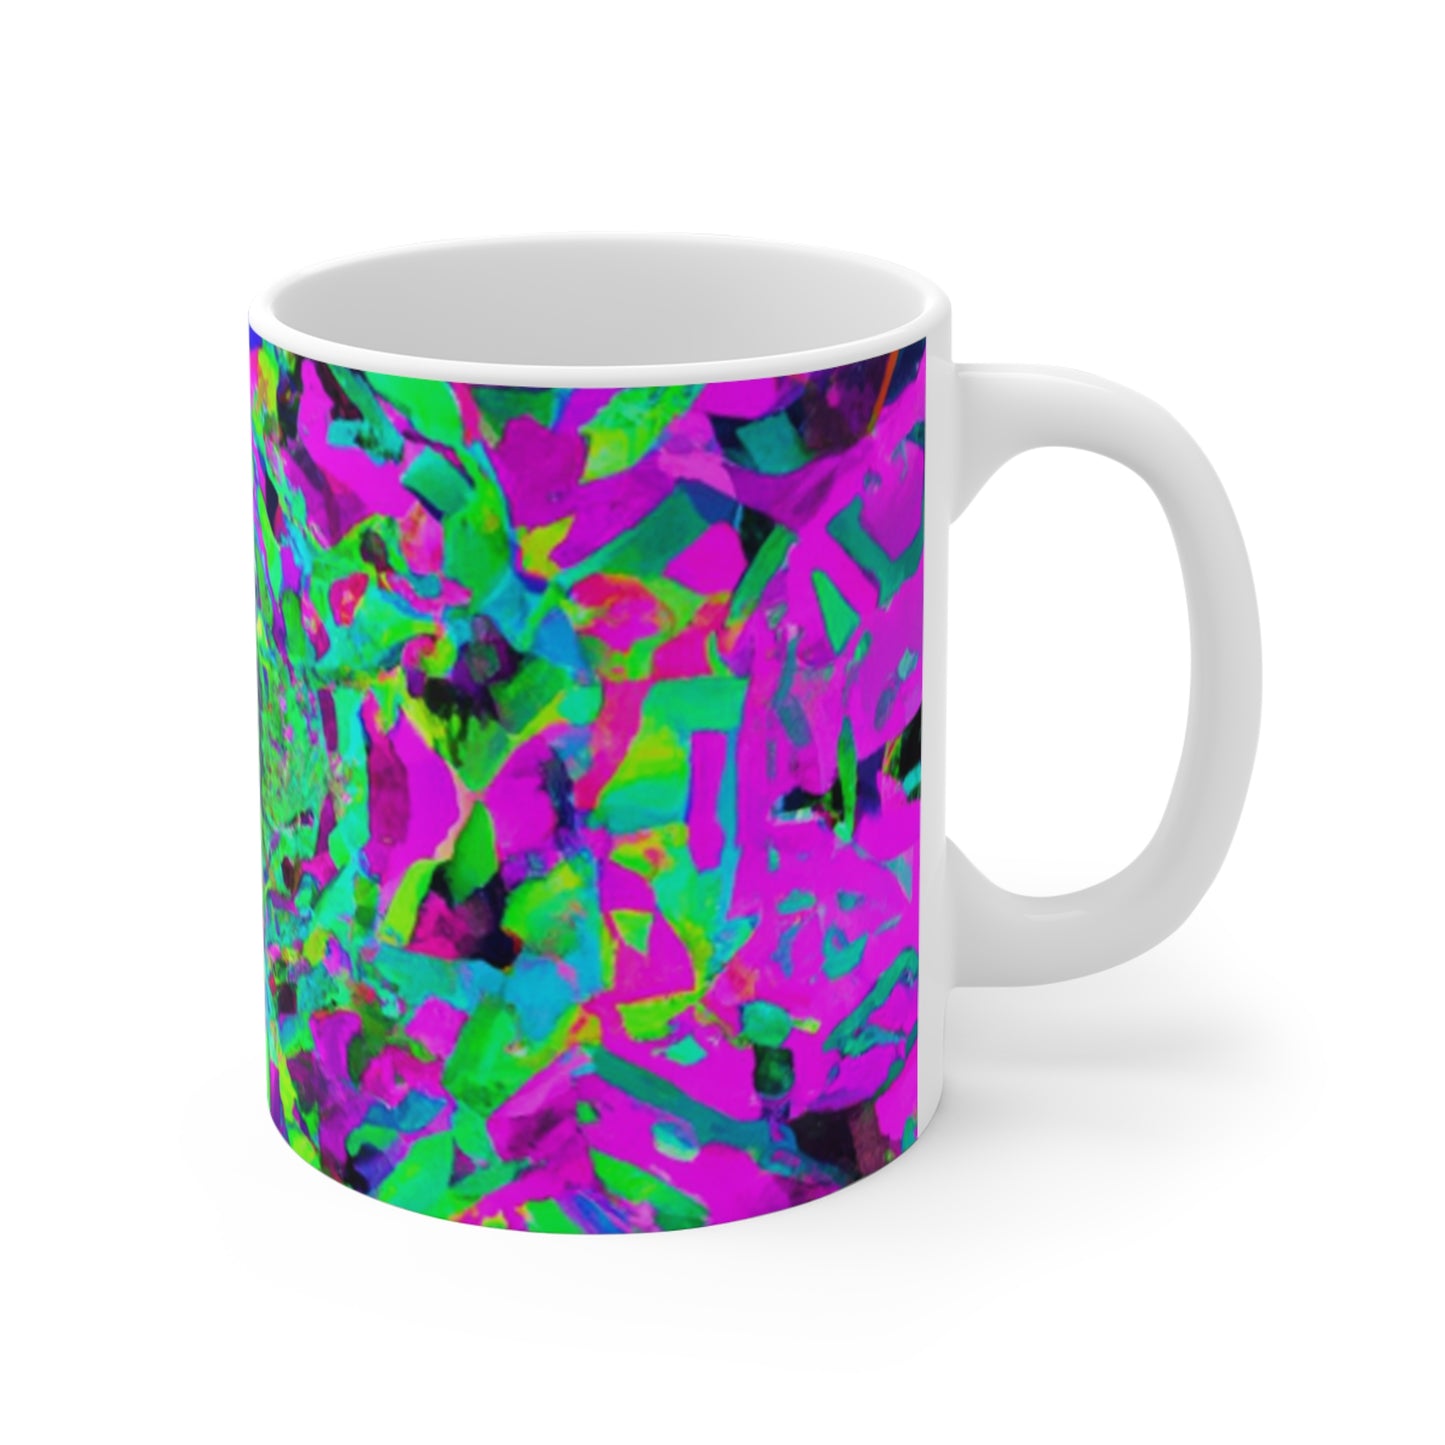 name 

Cindy's Classic Cafe - Psychedelic Coffee Cup Mug 11 Ounce